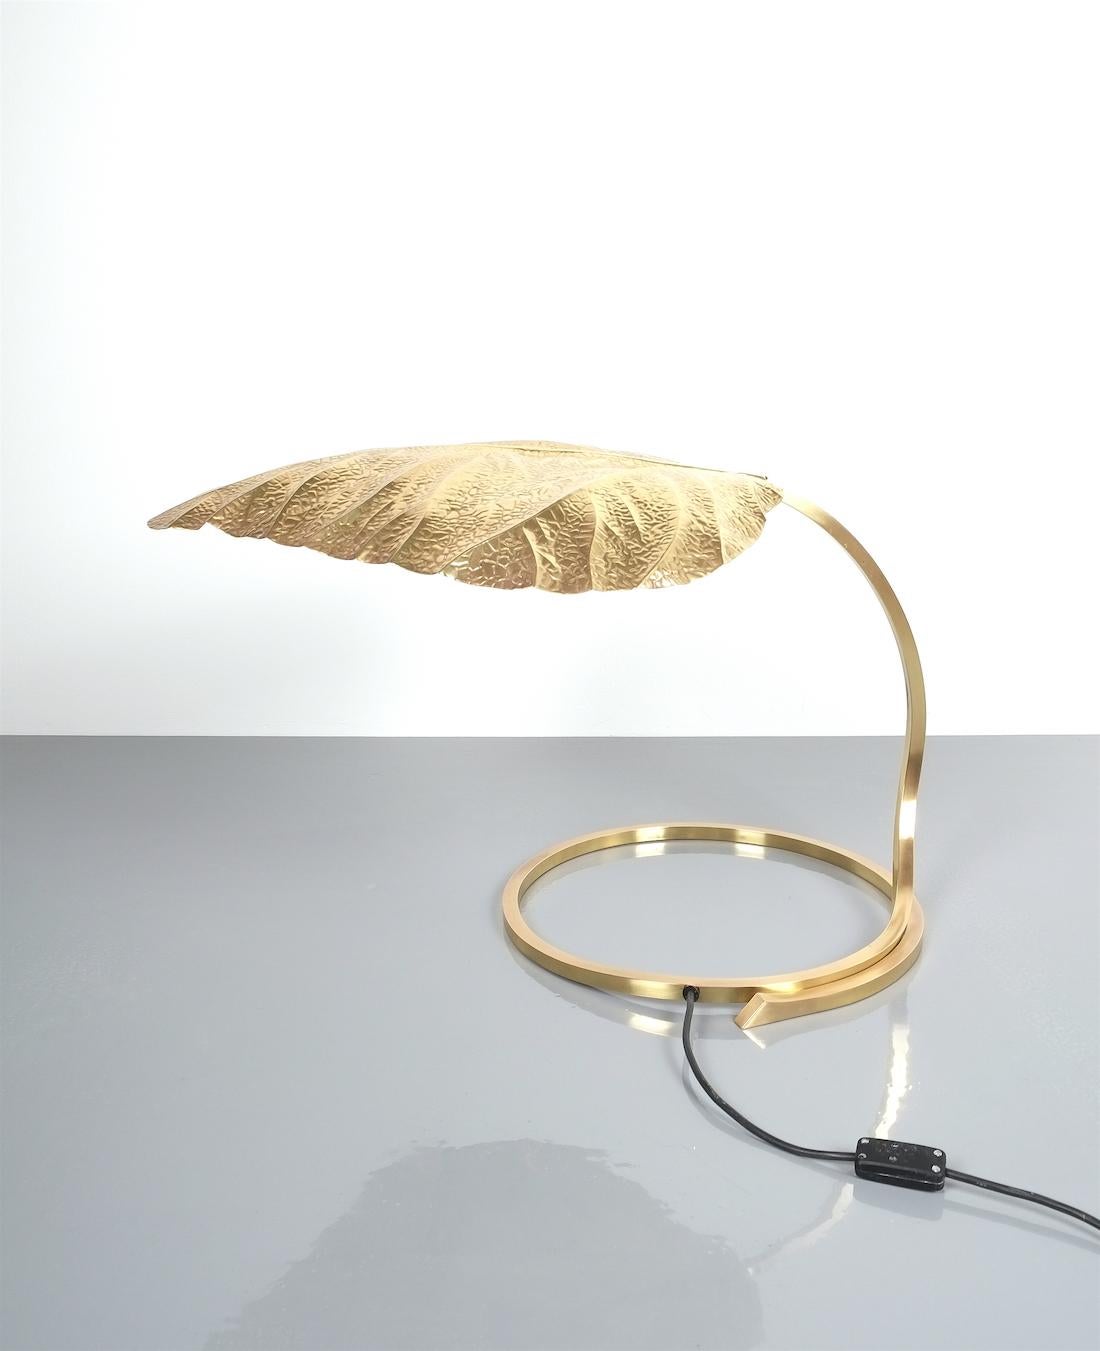 Excellent refurbished large table lights by Tomasso Barbi, Italy, 1970
These iconic single leaf Rhubarb table lamps were designed by Tommaso Barbi and Carlo Giorgi was produced by Bottega Gadda in Italy in the 1970s
Featuring a giant hammered shiny